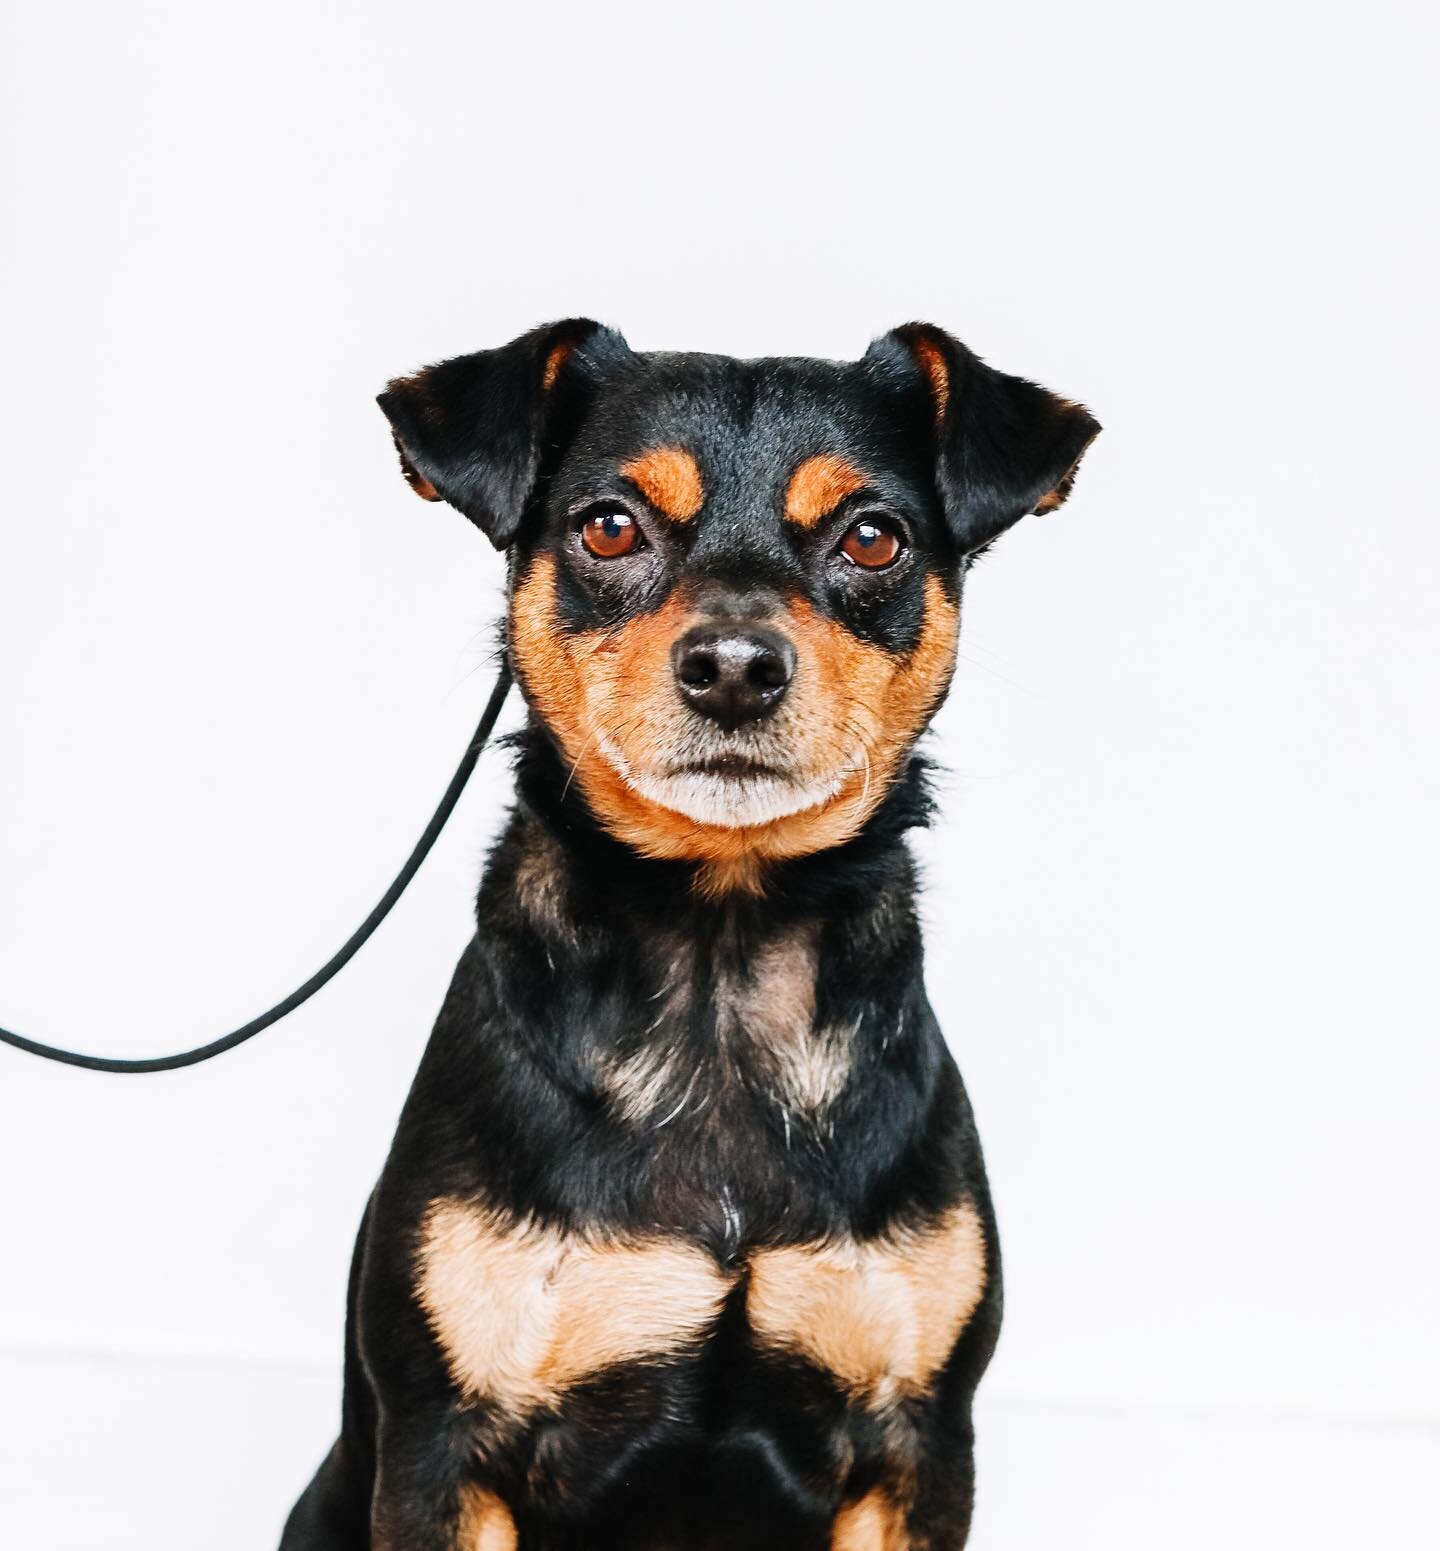 Bentley &bull; 6yrs &bull; Min pin mix

Training goals: he&rsquo;s got an extensive bite history, so getting a solid obedience foundation will give his family the tools and communication skills to manage his behaviors and help curb urge to protect th